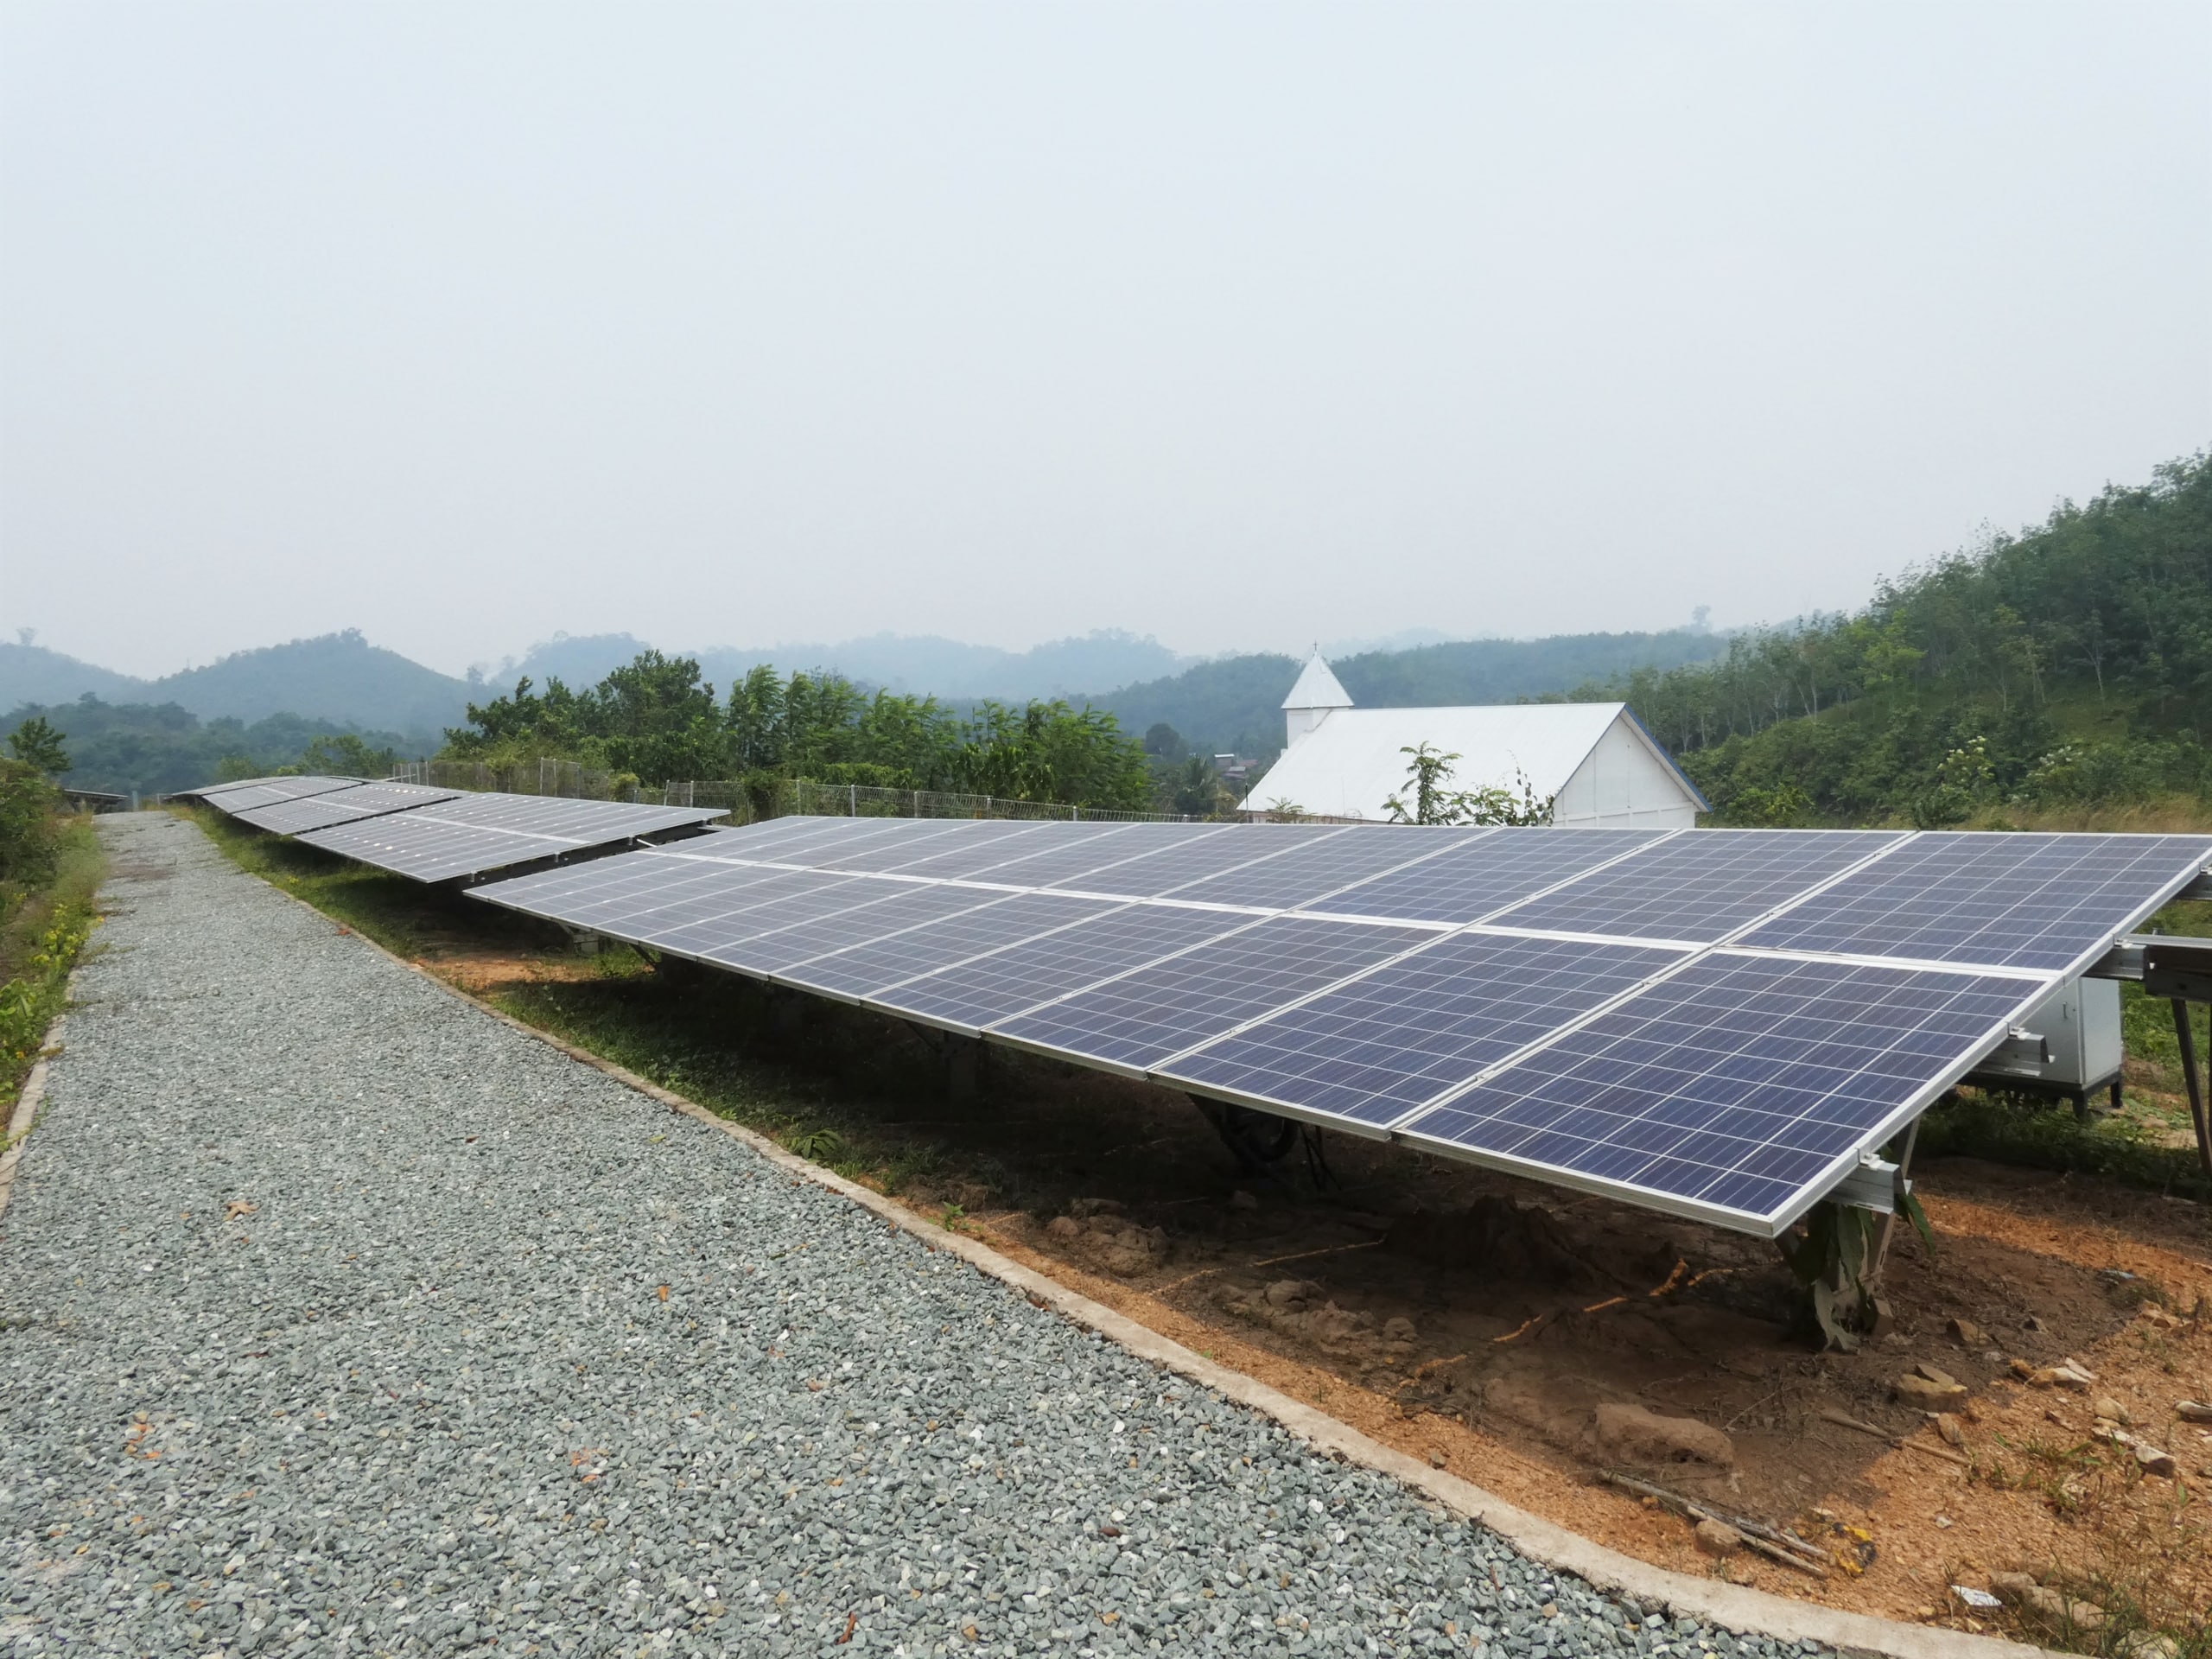 Solar panels powering a mini-grid in Indonesia.